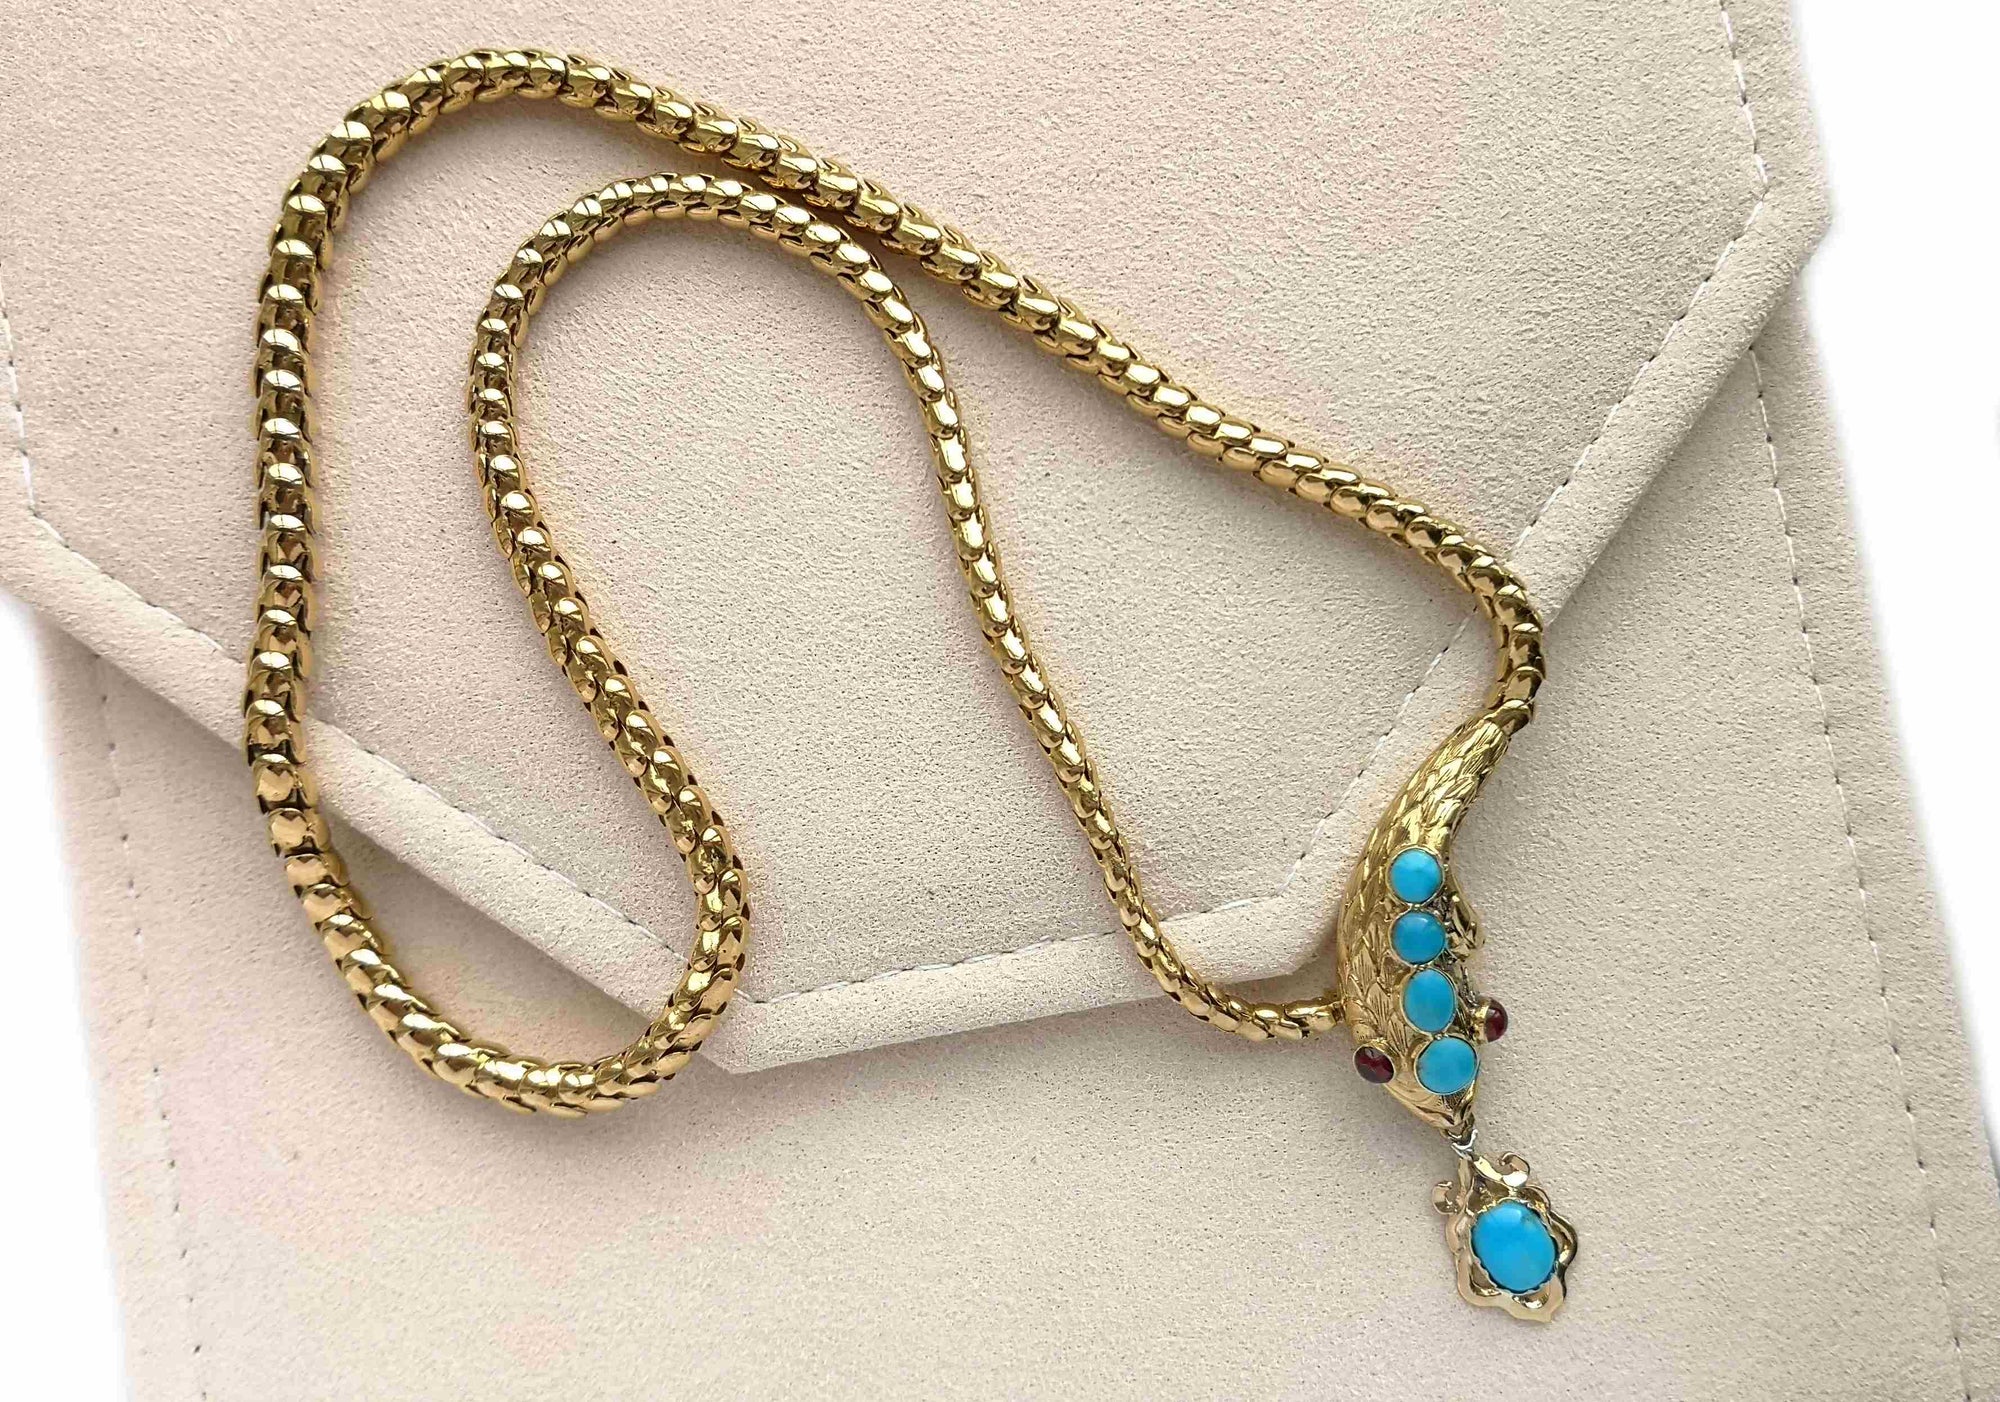 Victorian Snake Necklace With Turquoise & Rubies 22k Gold